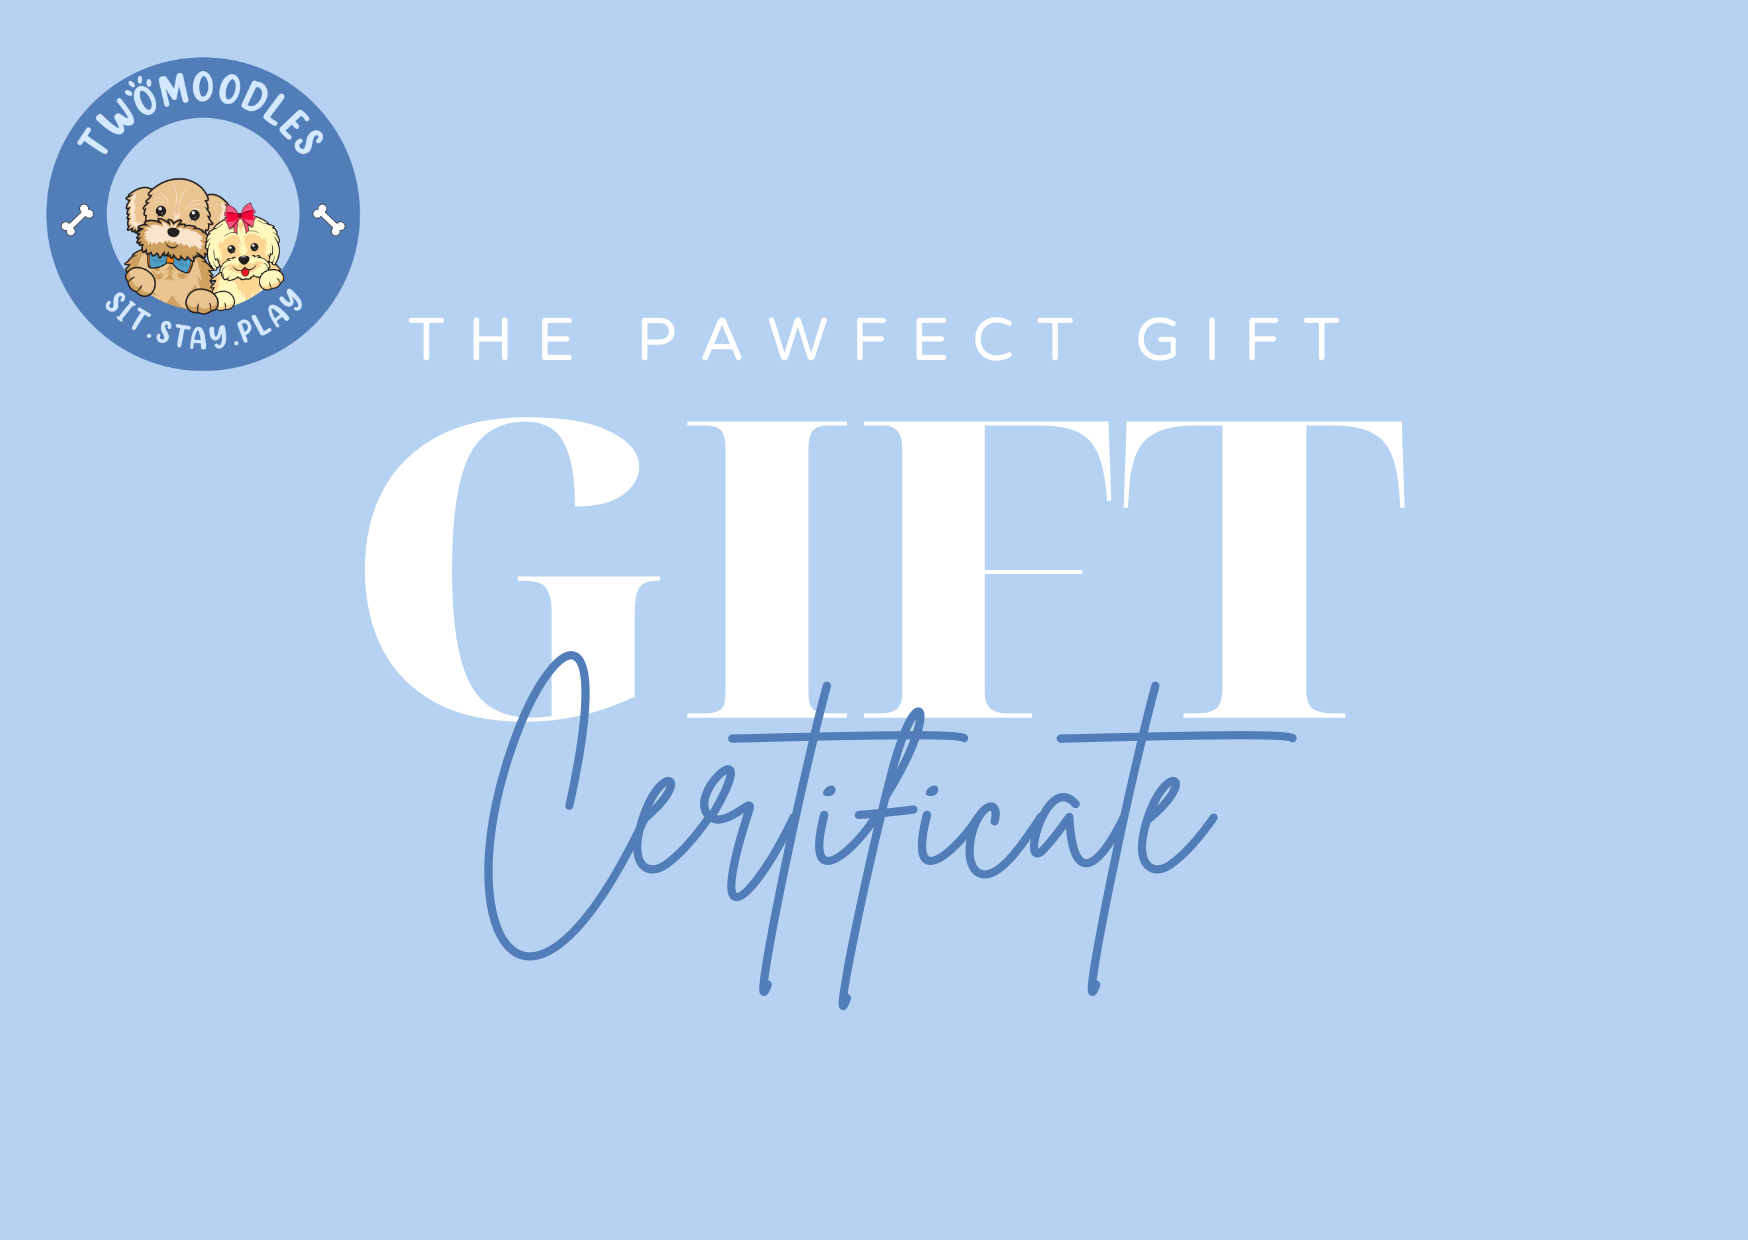 TWMOODLES GIFT CERTIFICATE